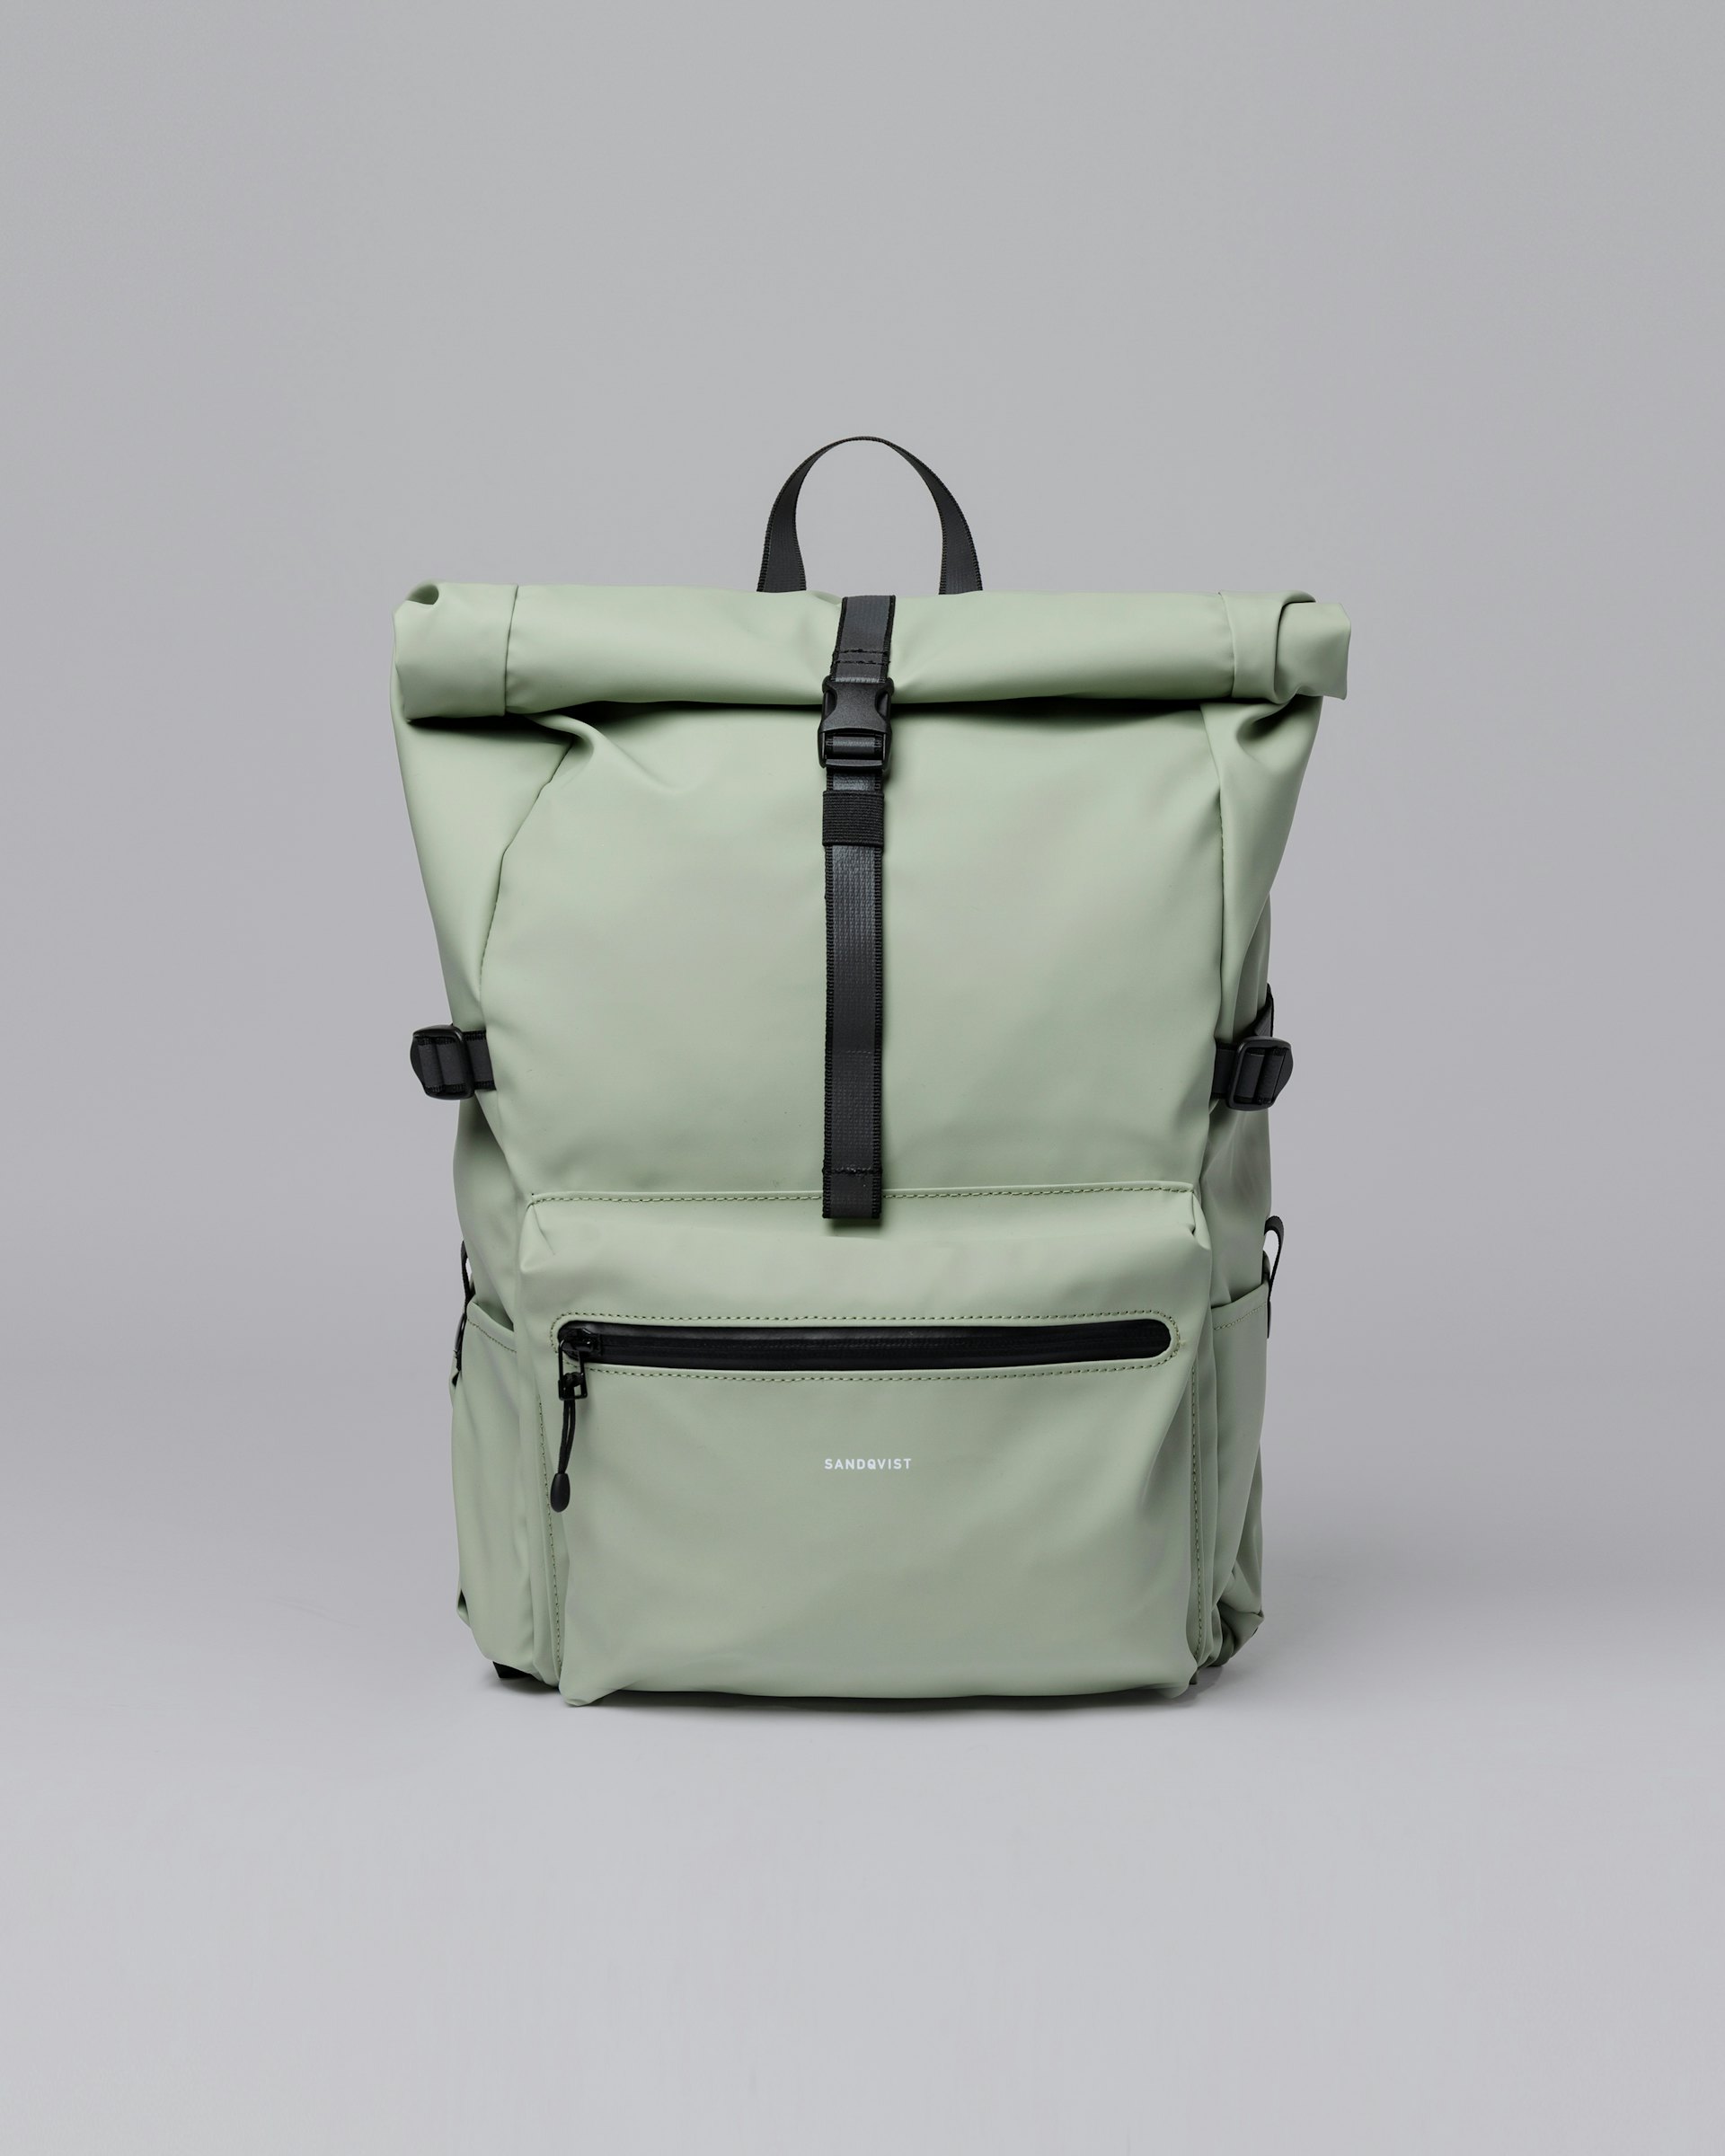 Ruben 2.0 belongs to the category Backpacks and is in color dew green